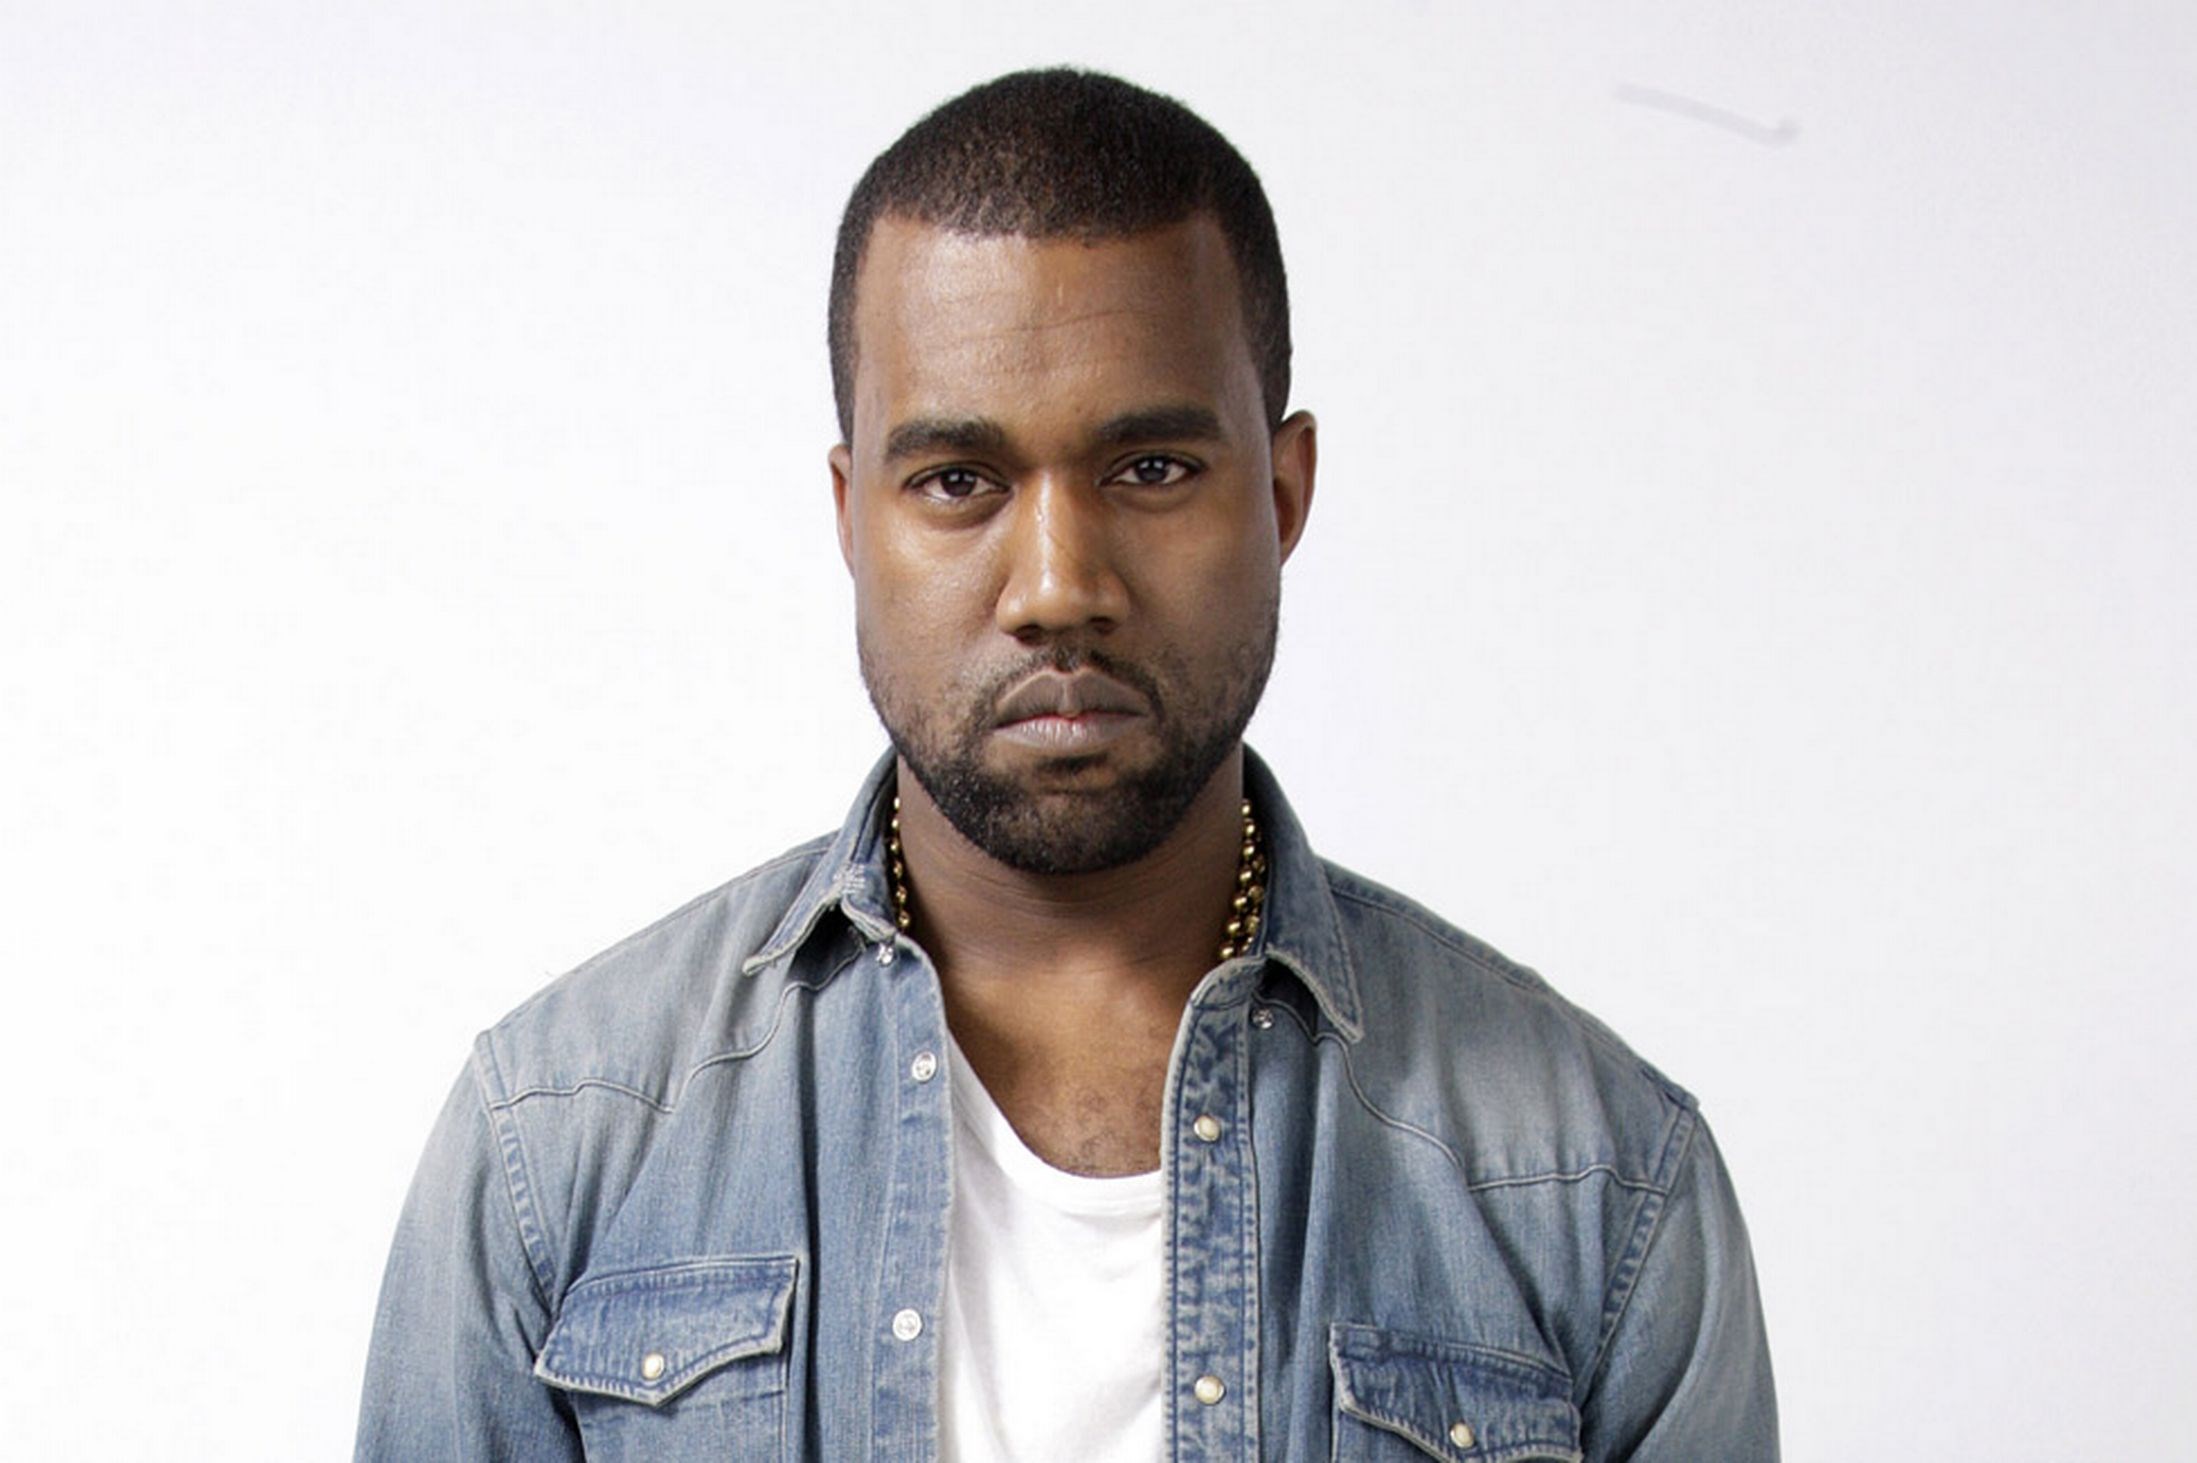 Hdq Images Kanye West - Kanny West , HD Wallpaper & Backgrounds